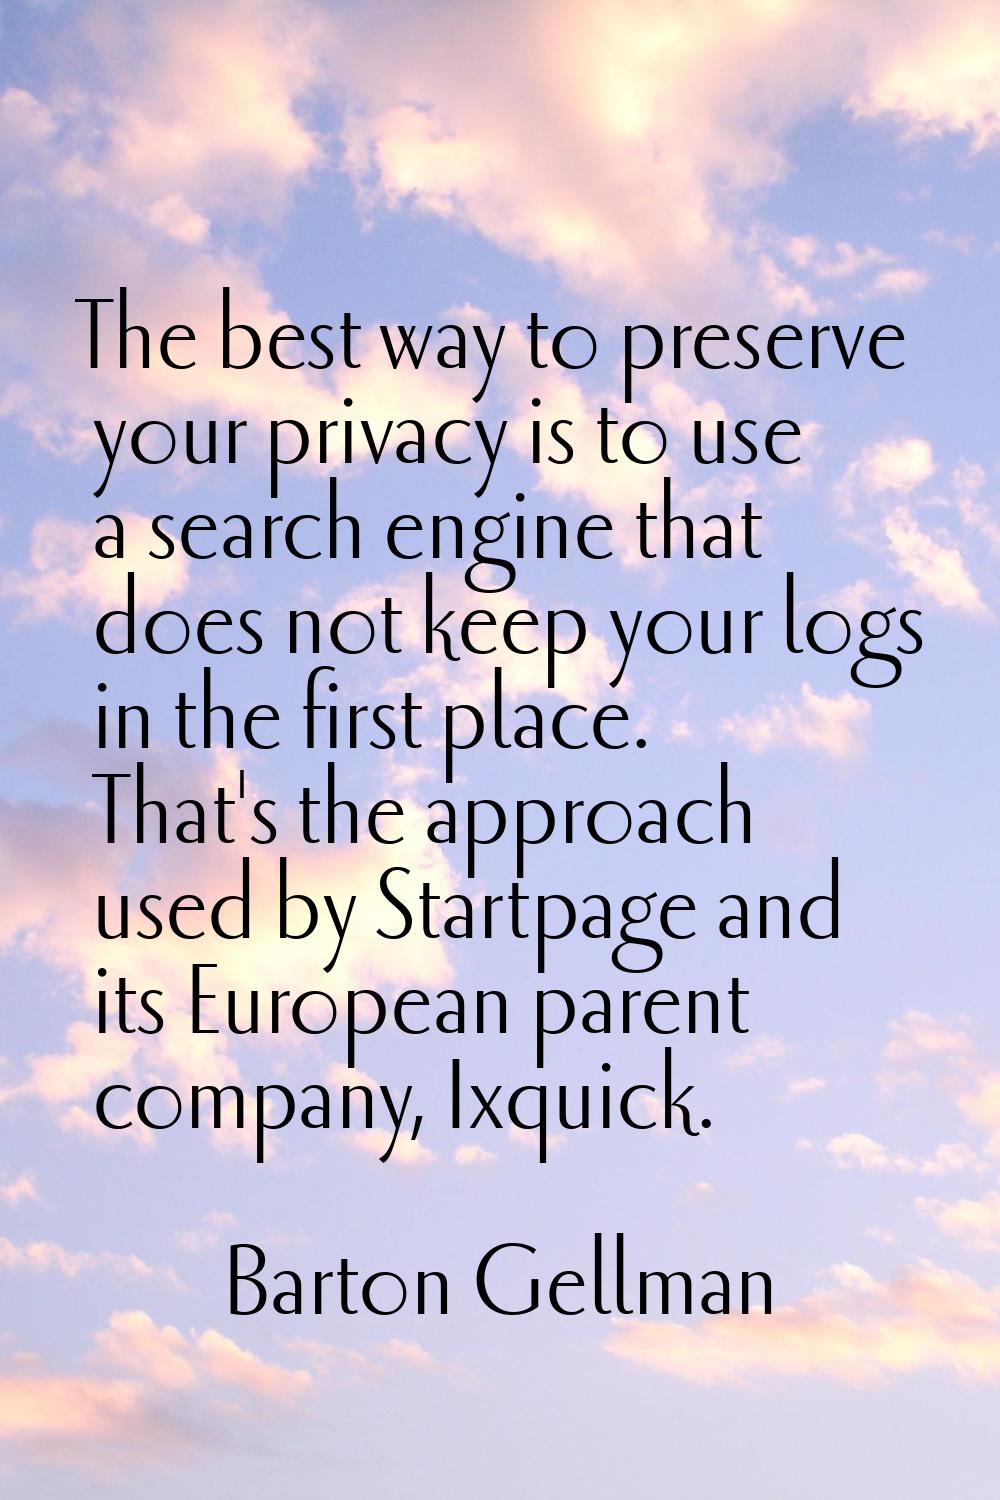 The best way to preserve your privacy is to use a search engine that does not keep your logs in the